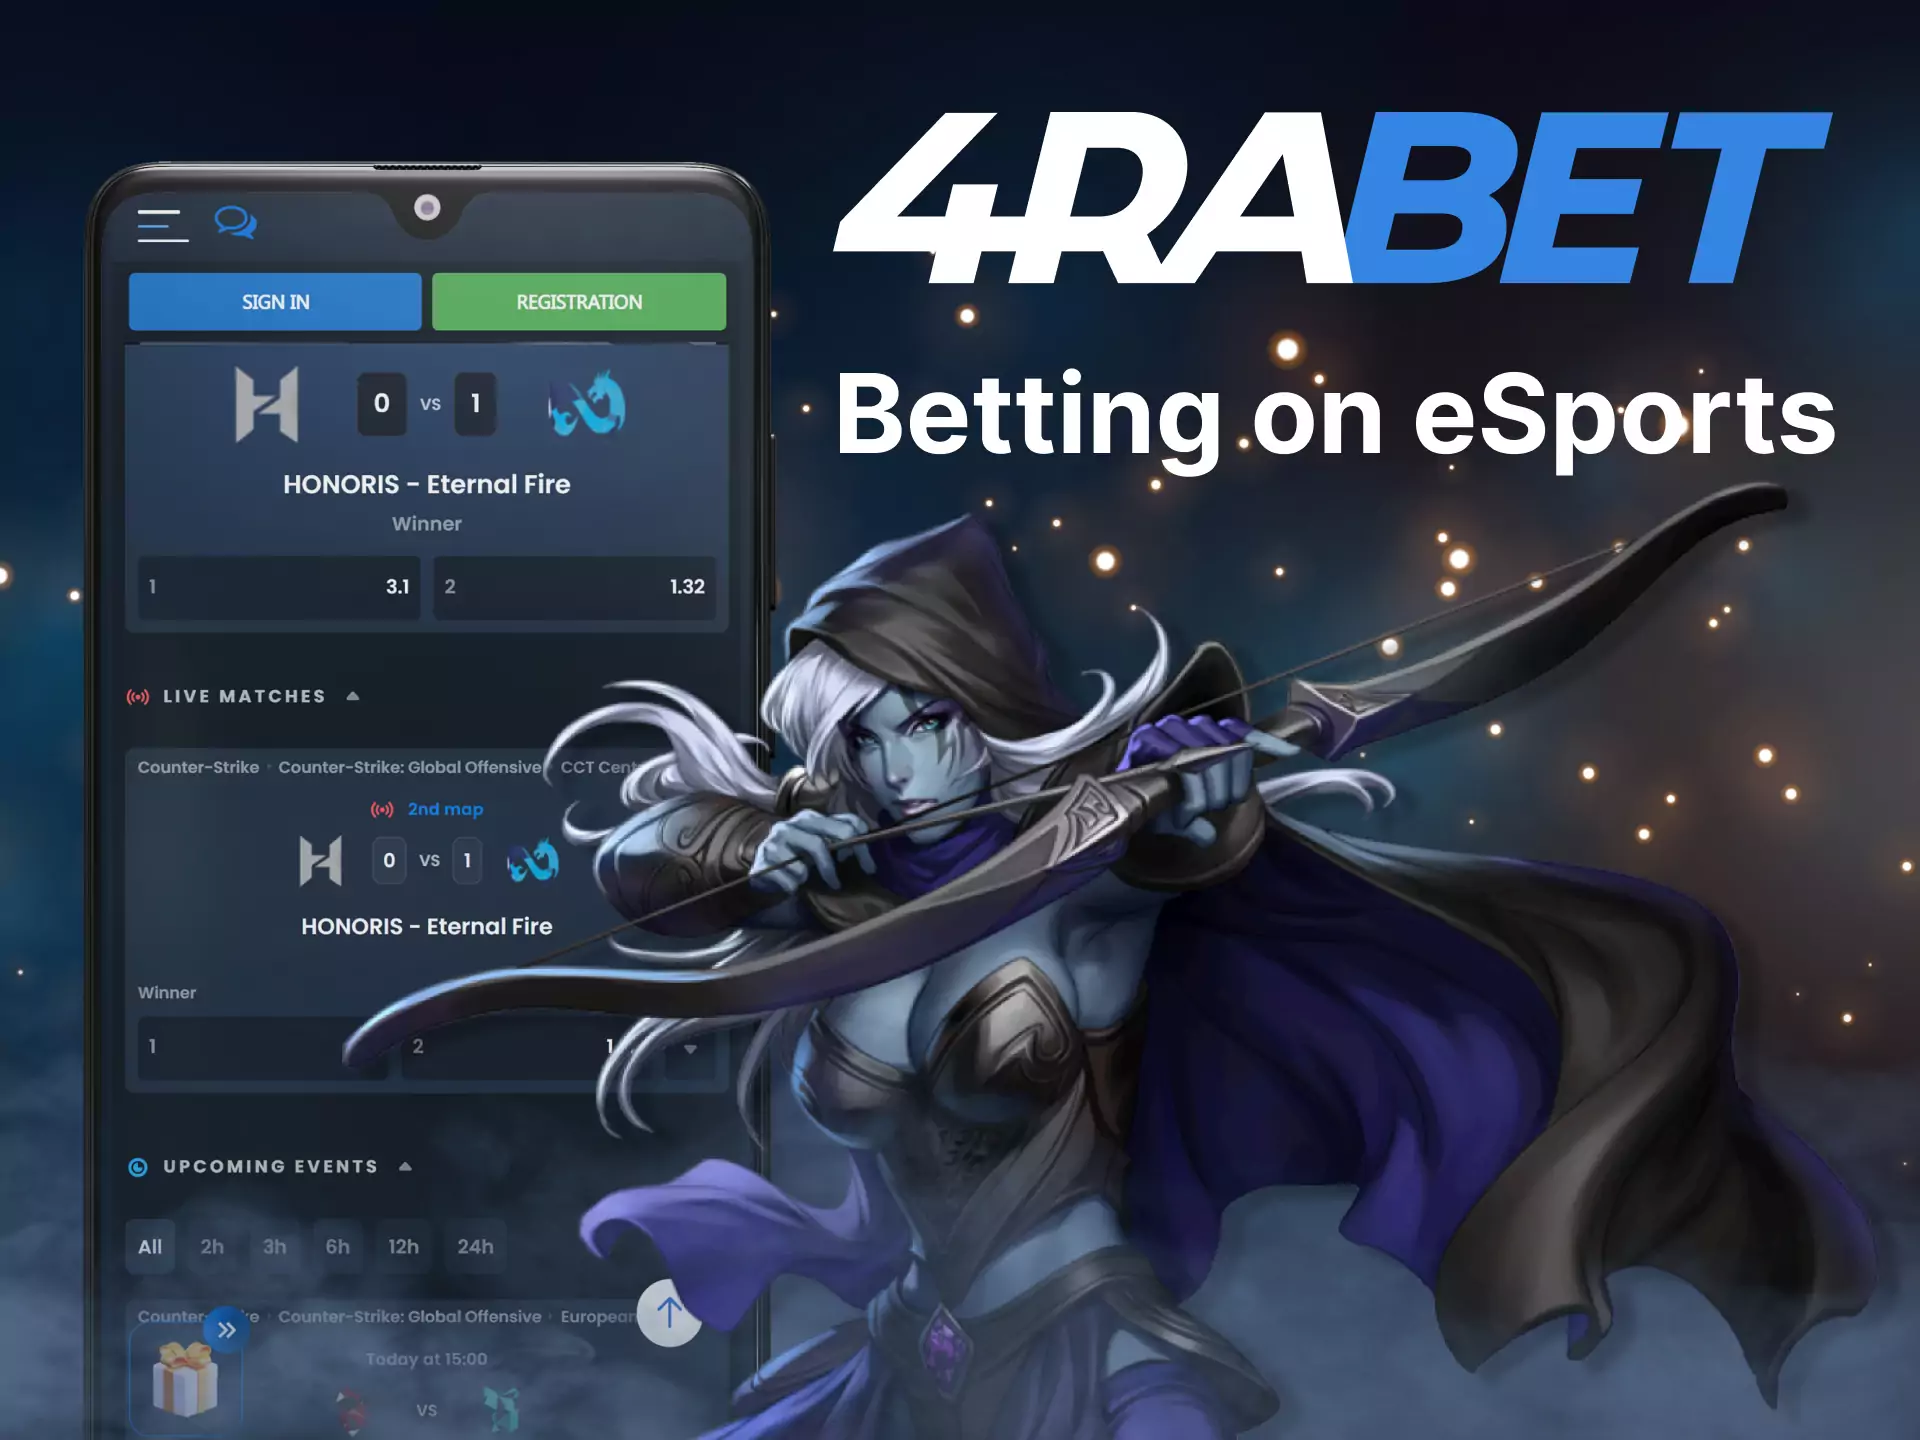 If you are a fan of esports then bet in the mobile app 4rabet.